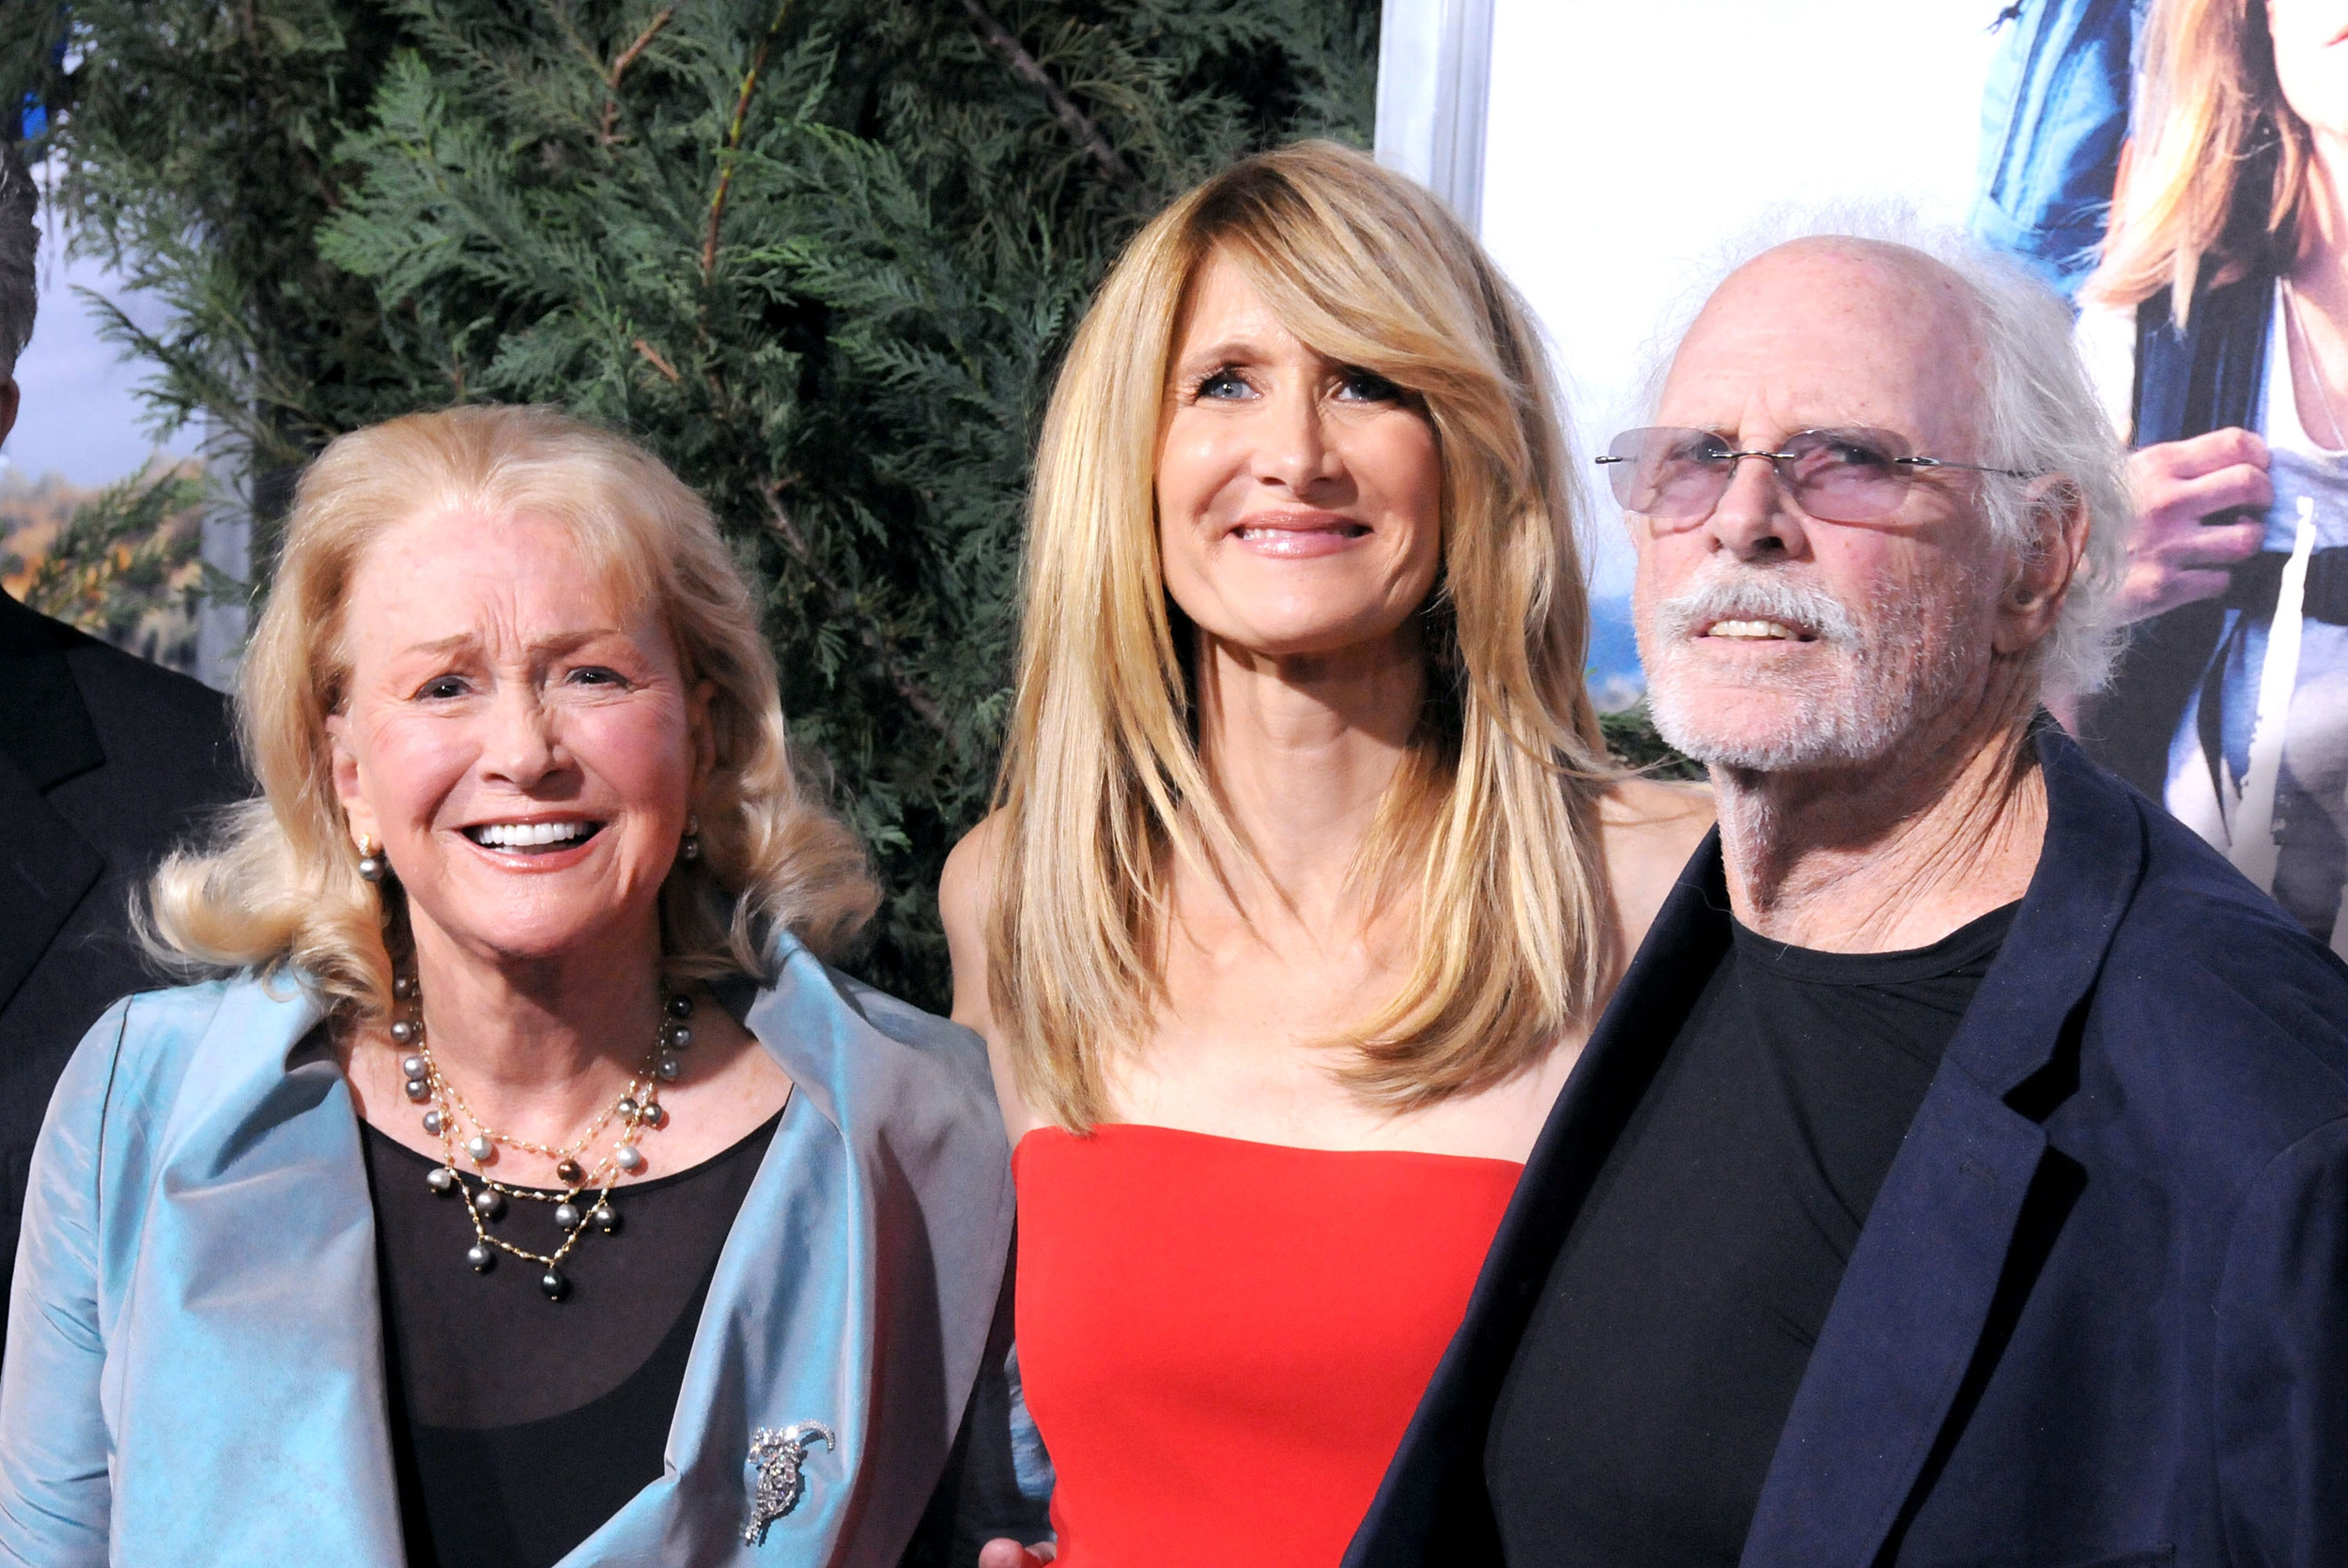 <p>Golden Globe and Emmy Award winner Laura Dern (<em>Jurassic Park, Enlightened, Big Little Lies</em>) certainly had the family genes to work with. Her father, Bruce Dern (<em>Coming Home, Nebraska</em>), is one of the most lauded and respected actors of all time. Her mother, Diane Ladd, earned Academy Award nominations for <em>Alice Doesn't Live Here Anymore</em> (1974), <em>Wild at Heart </em>(1990), and <em>Rambling Rose</em> (1991).</p><p>You may also like: <a href='https://www.yardbarker.com/entertainment/articles/25_one_album_wonders/s1__38707316'>25 one-album wonders</a></p>